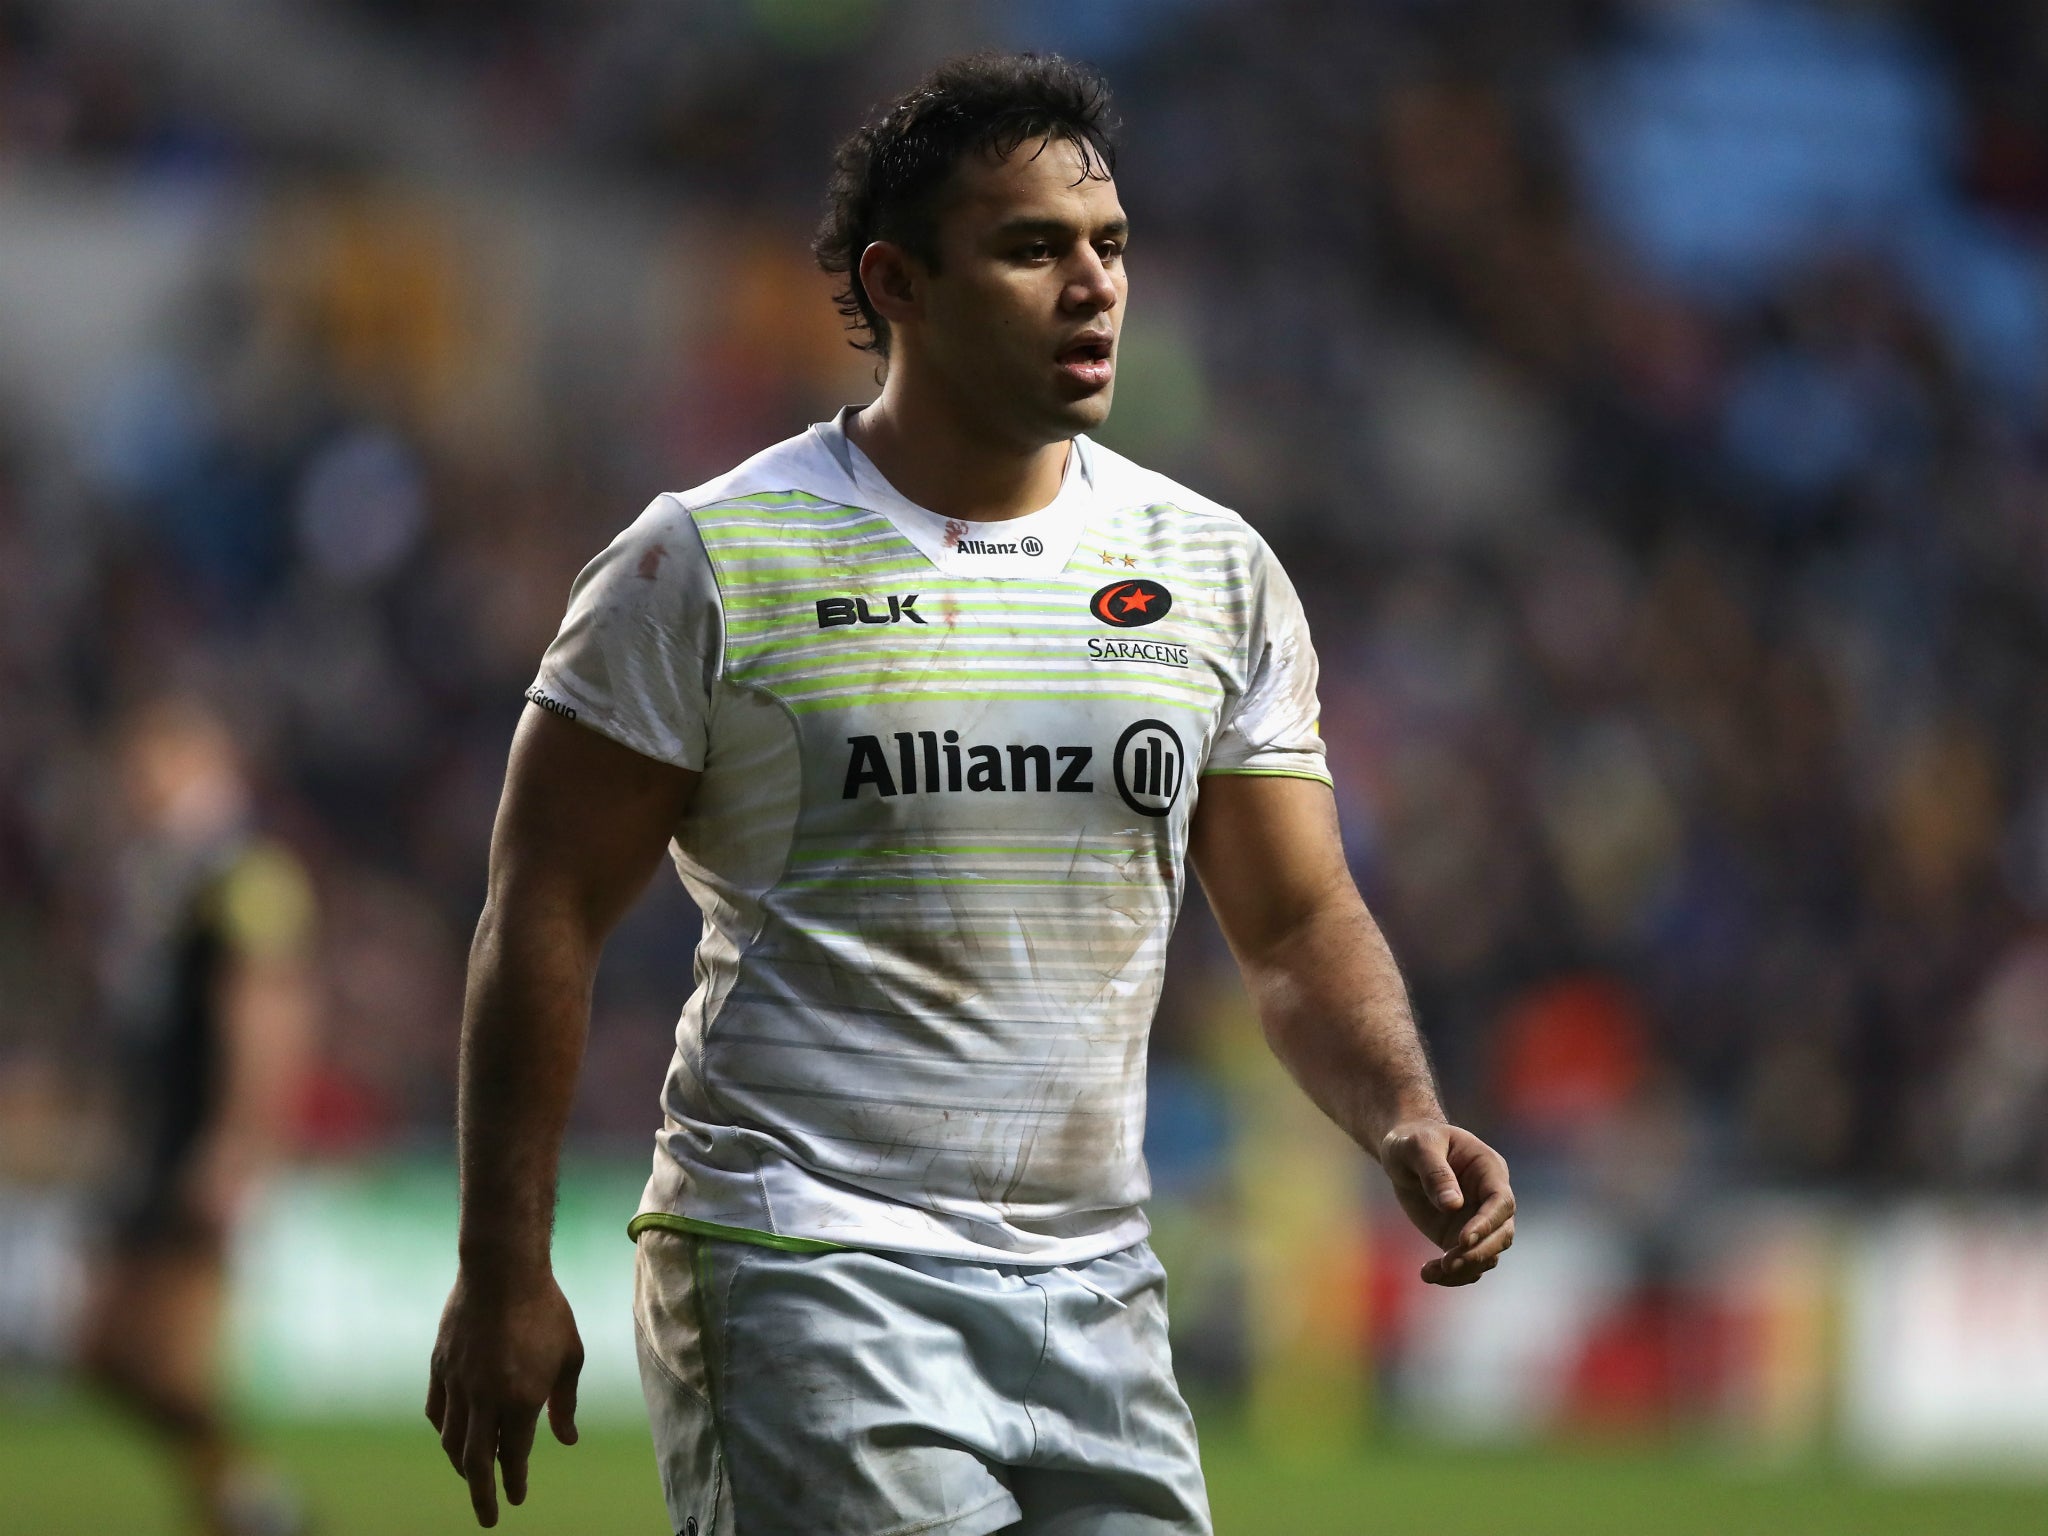 Billy Vunipola is in line to start for Saracens this weekend against Wasps